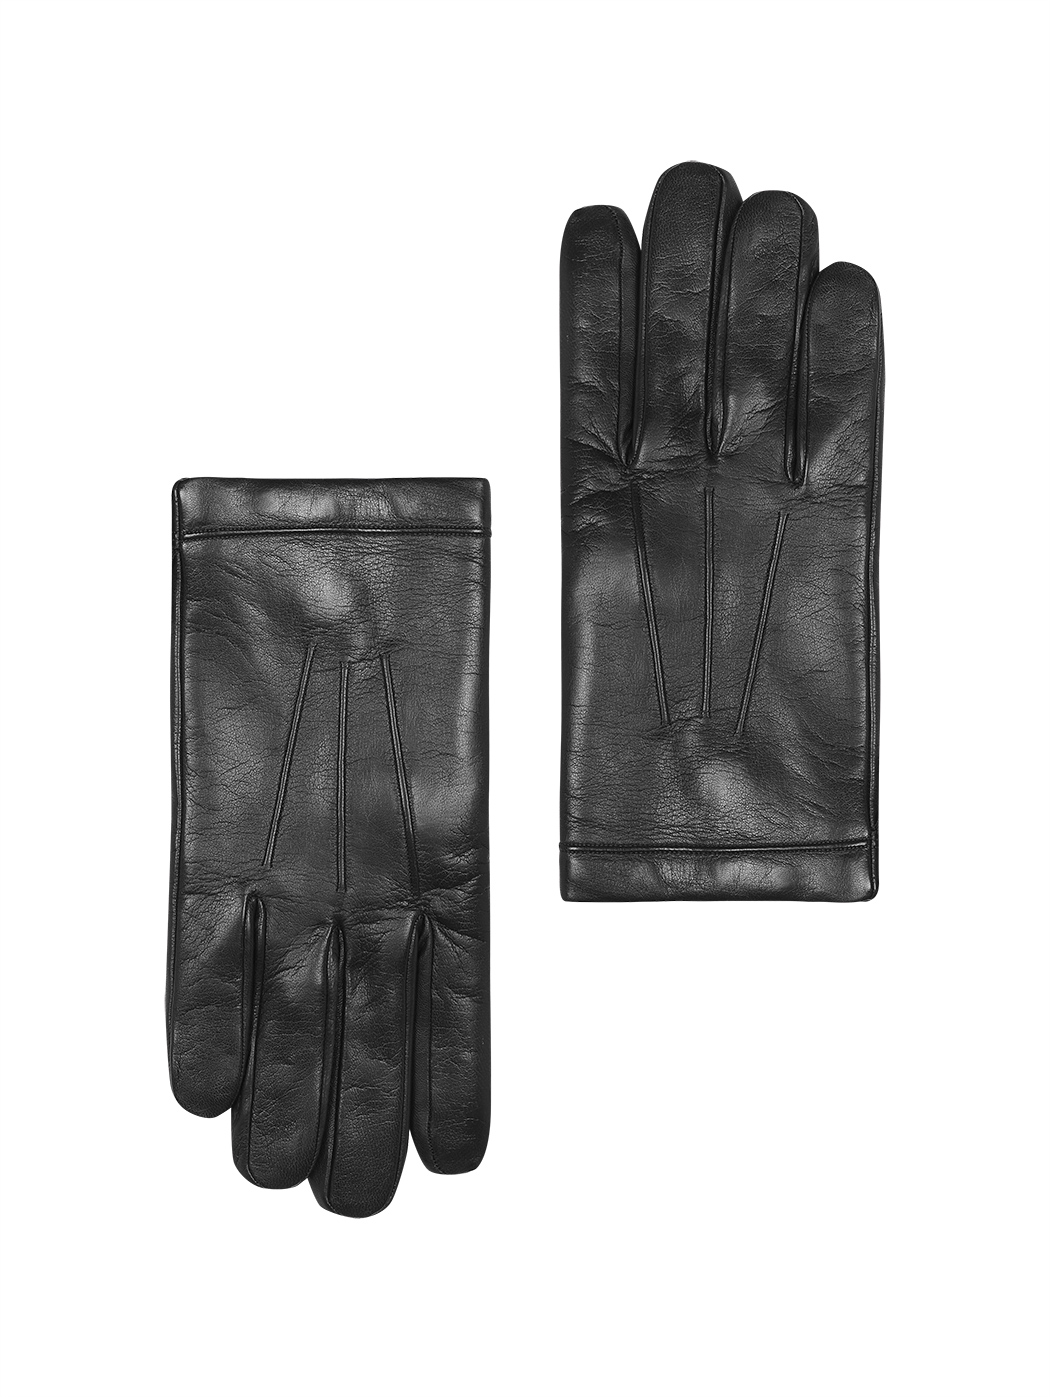 Men's Lined Gloves In Leather & Cashmere Black